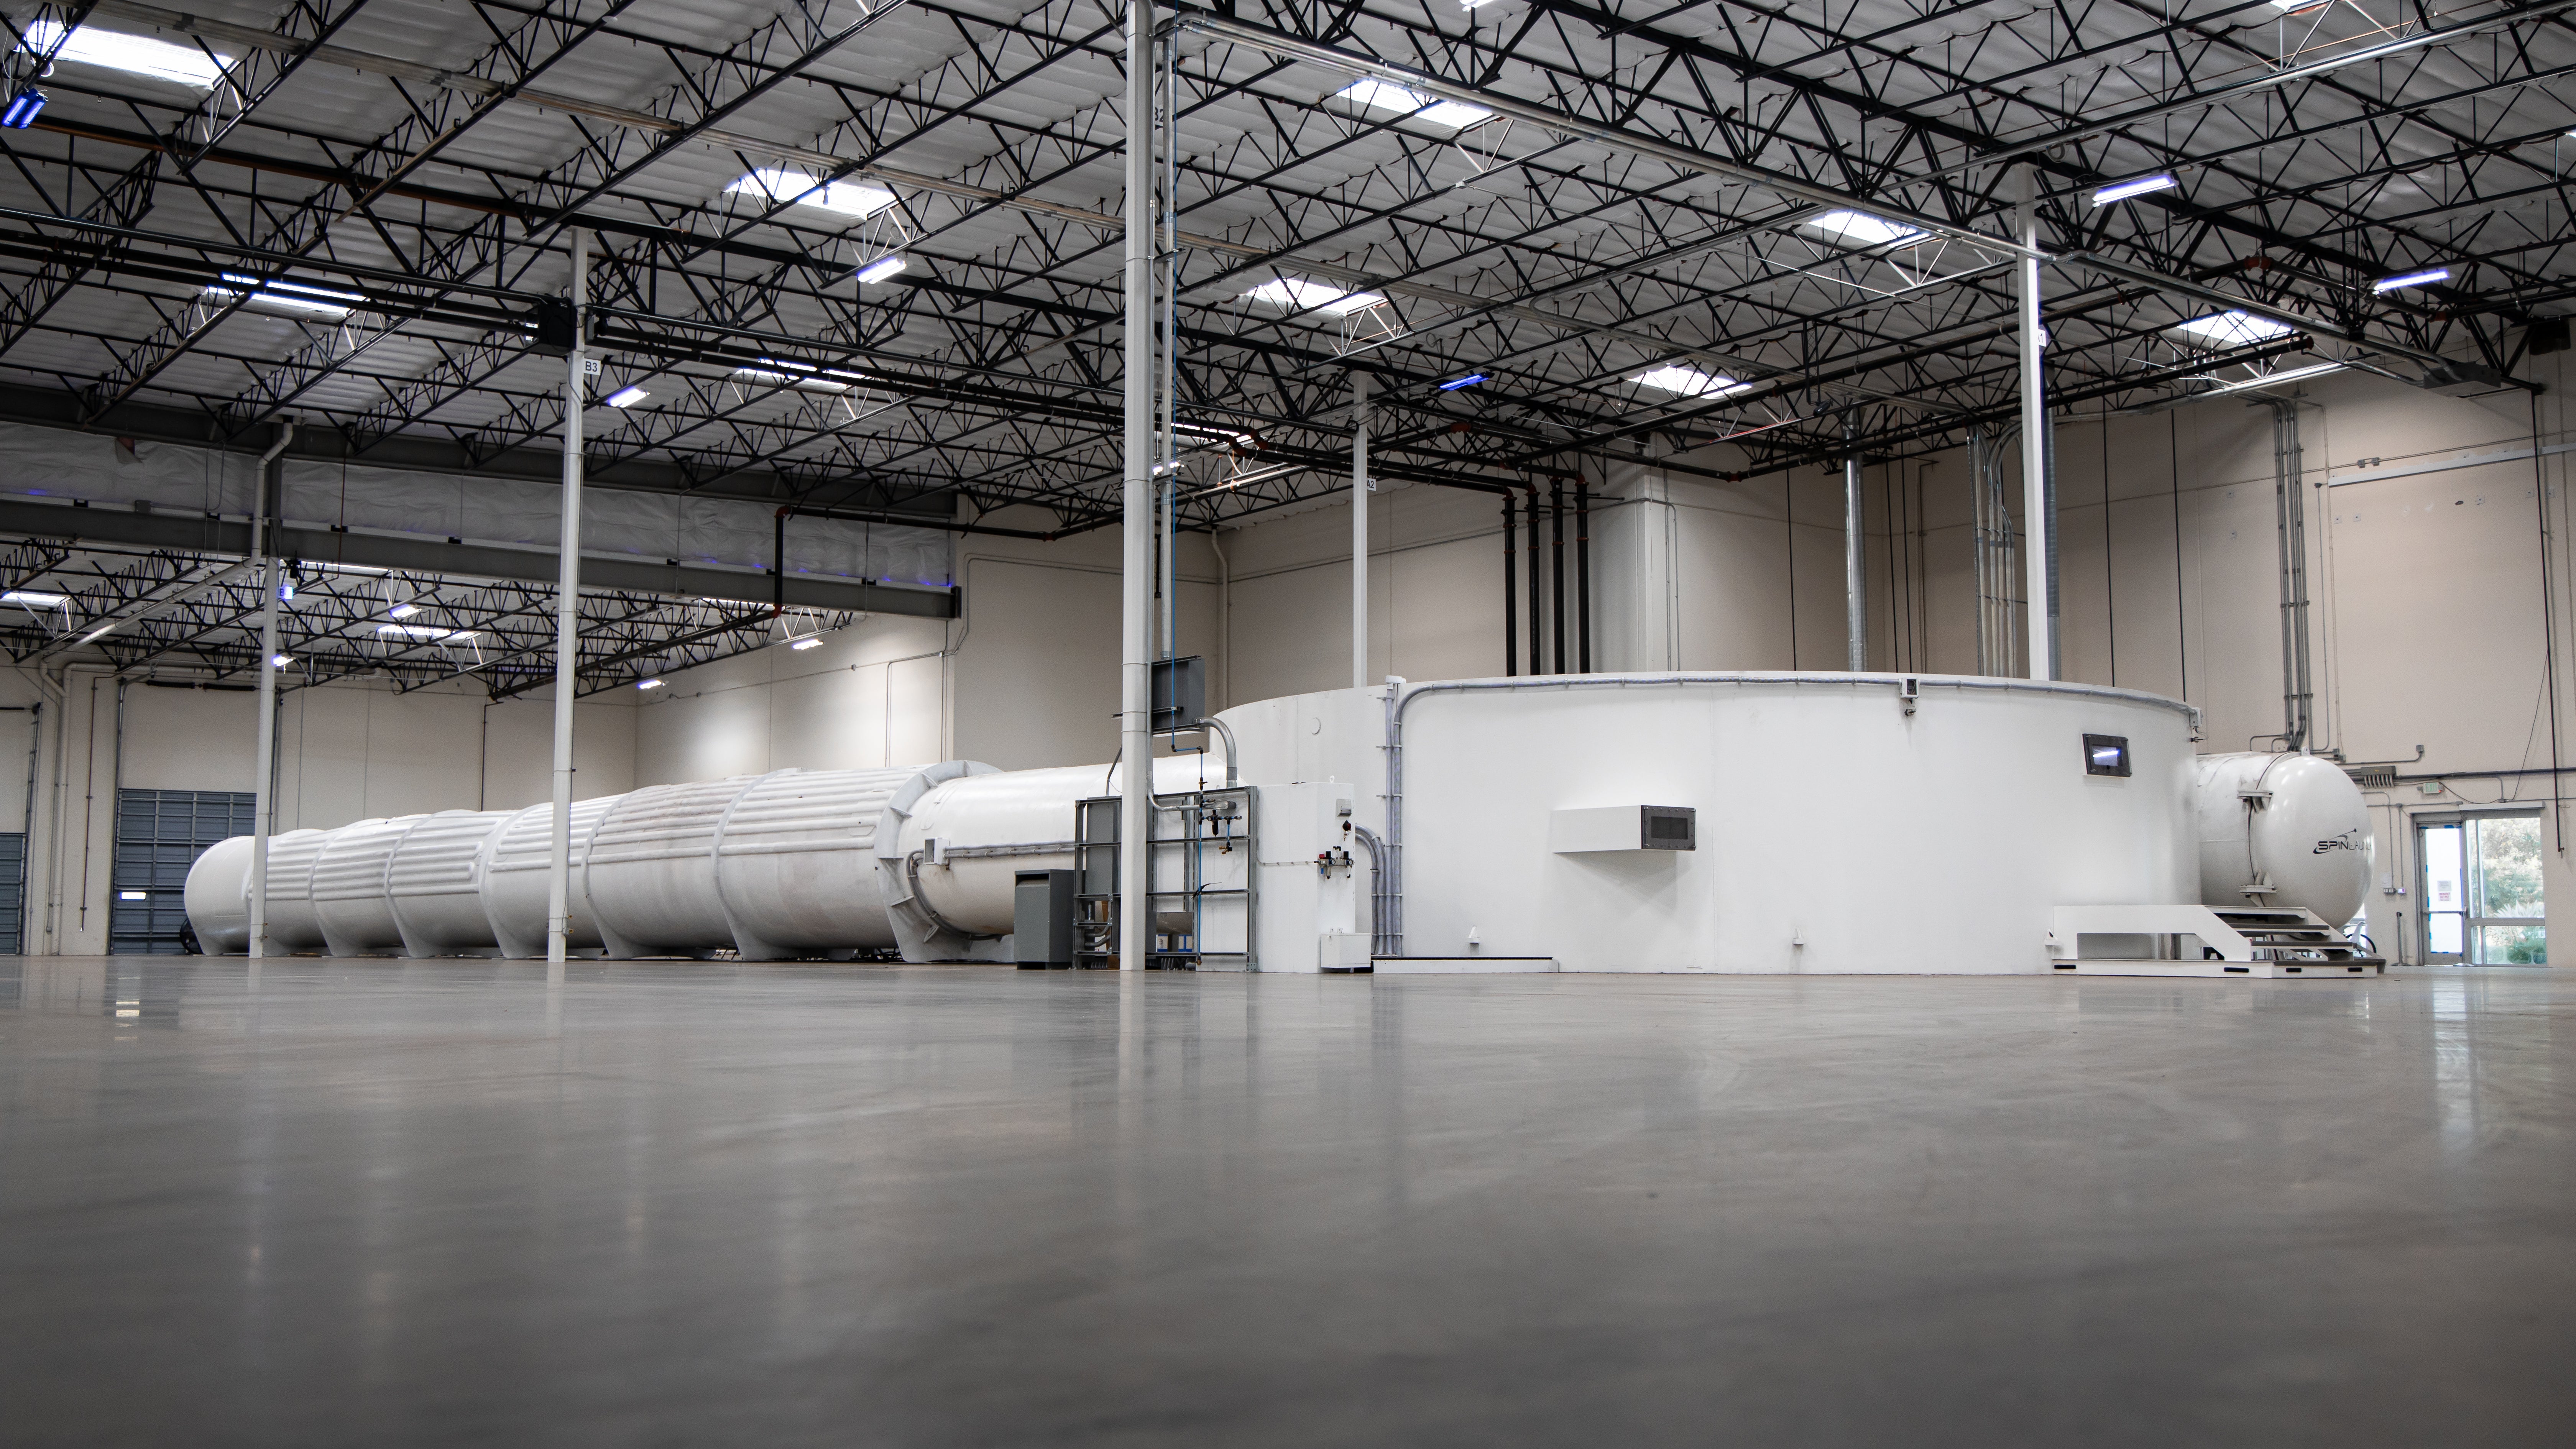 The A12 Lab Accelerator at the company's headquarters in Long Beach, California. The system is used as part of the pre-flight qualification process and can accelerate payloads up to 10,000 Gs. (Photo: SpinLaunch)